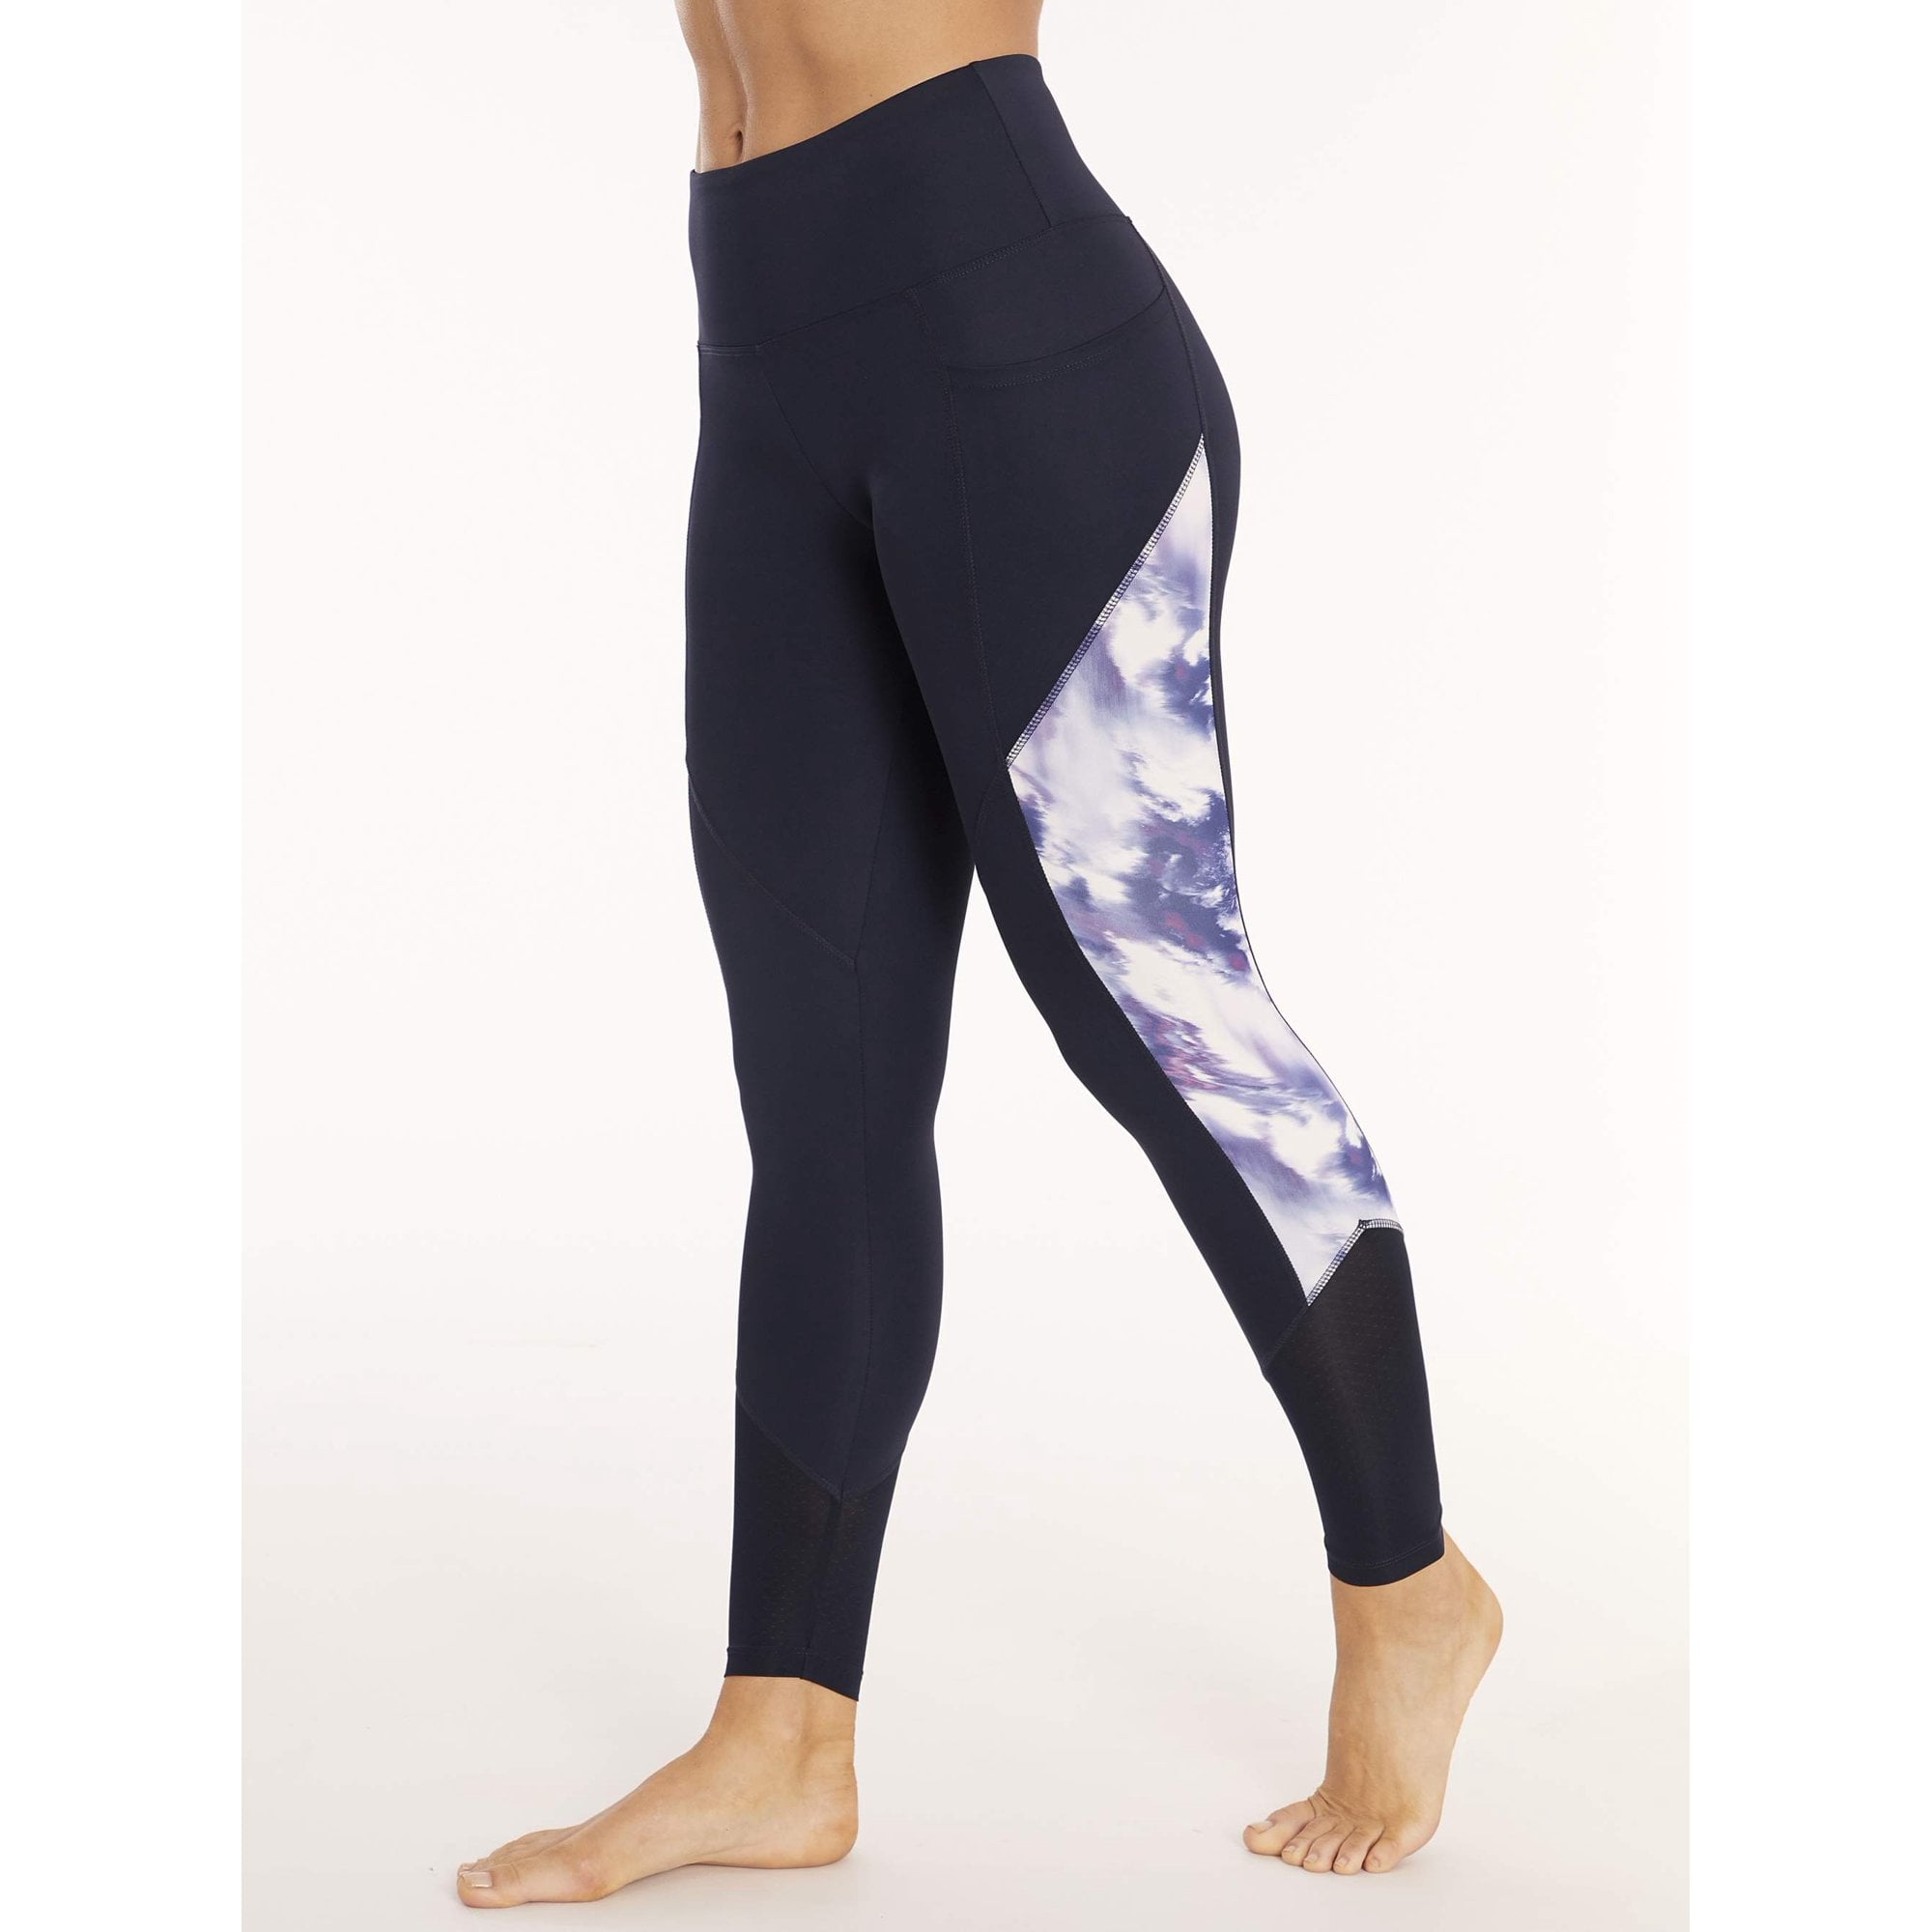 Up to 70% off Bally Total Fitness Leggings, Tanks and more + Exclusive  Extra 15% off! | Money Saving Mom®